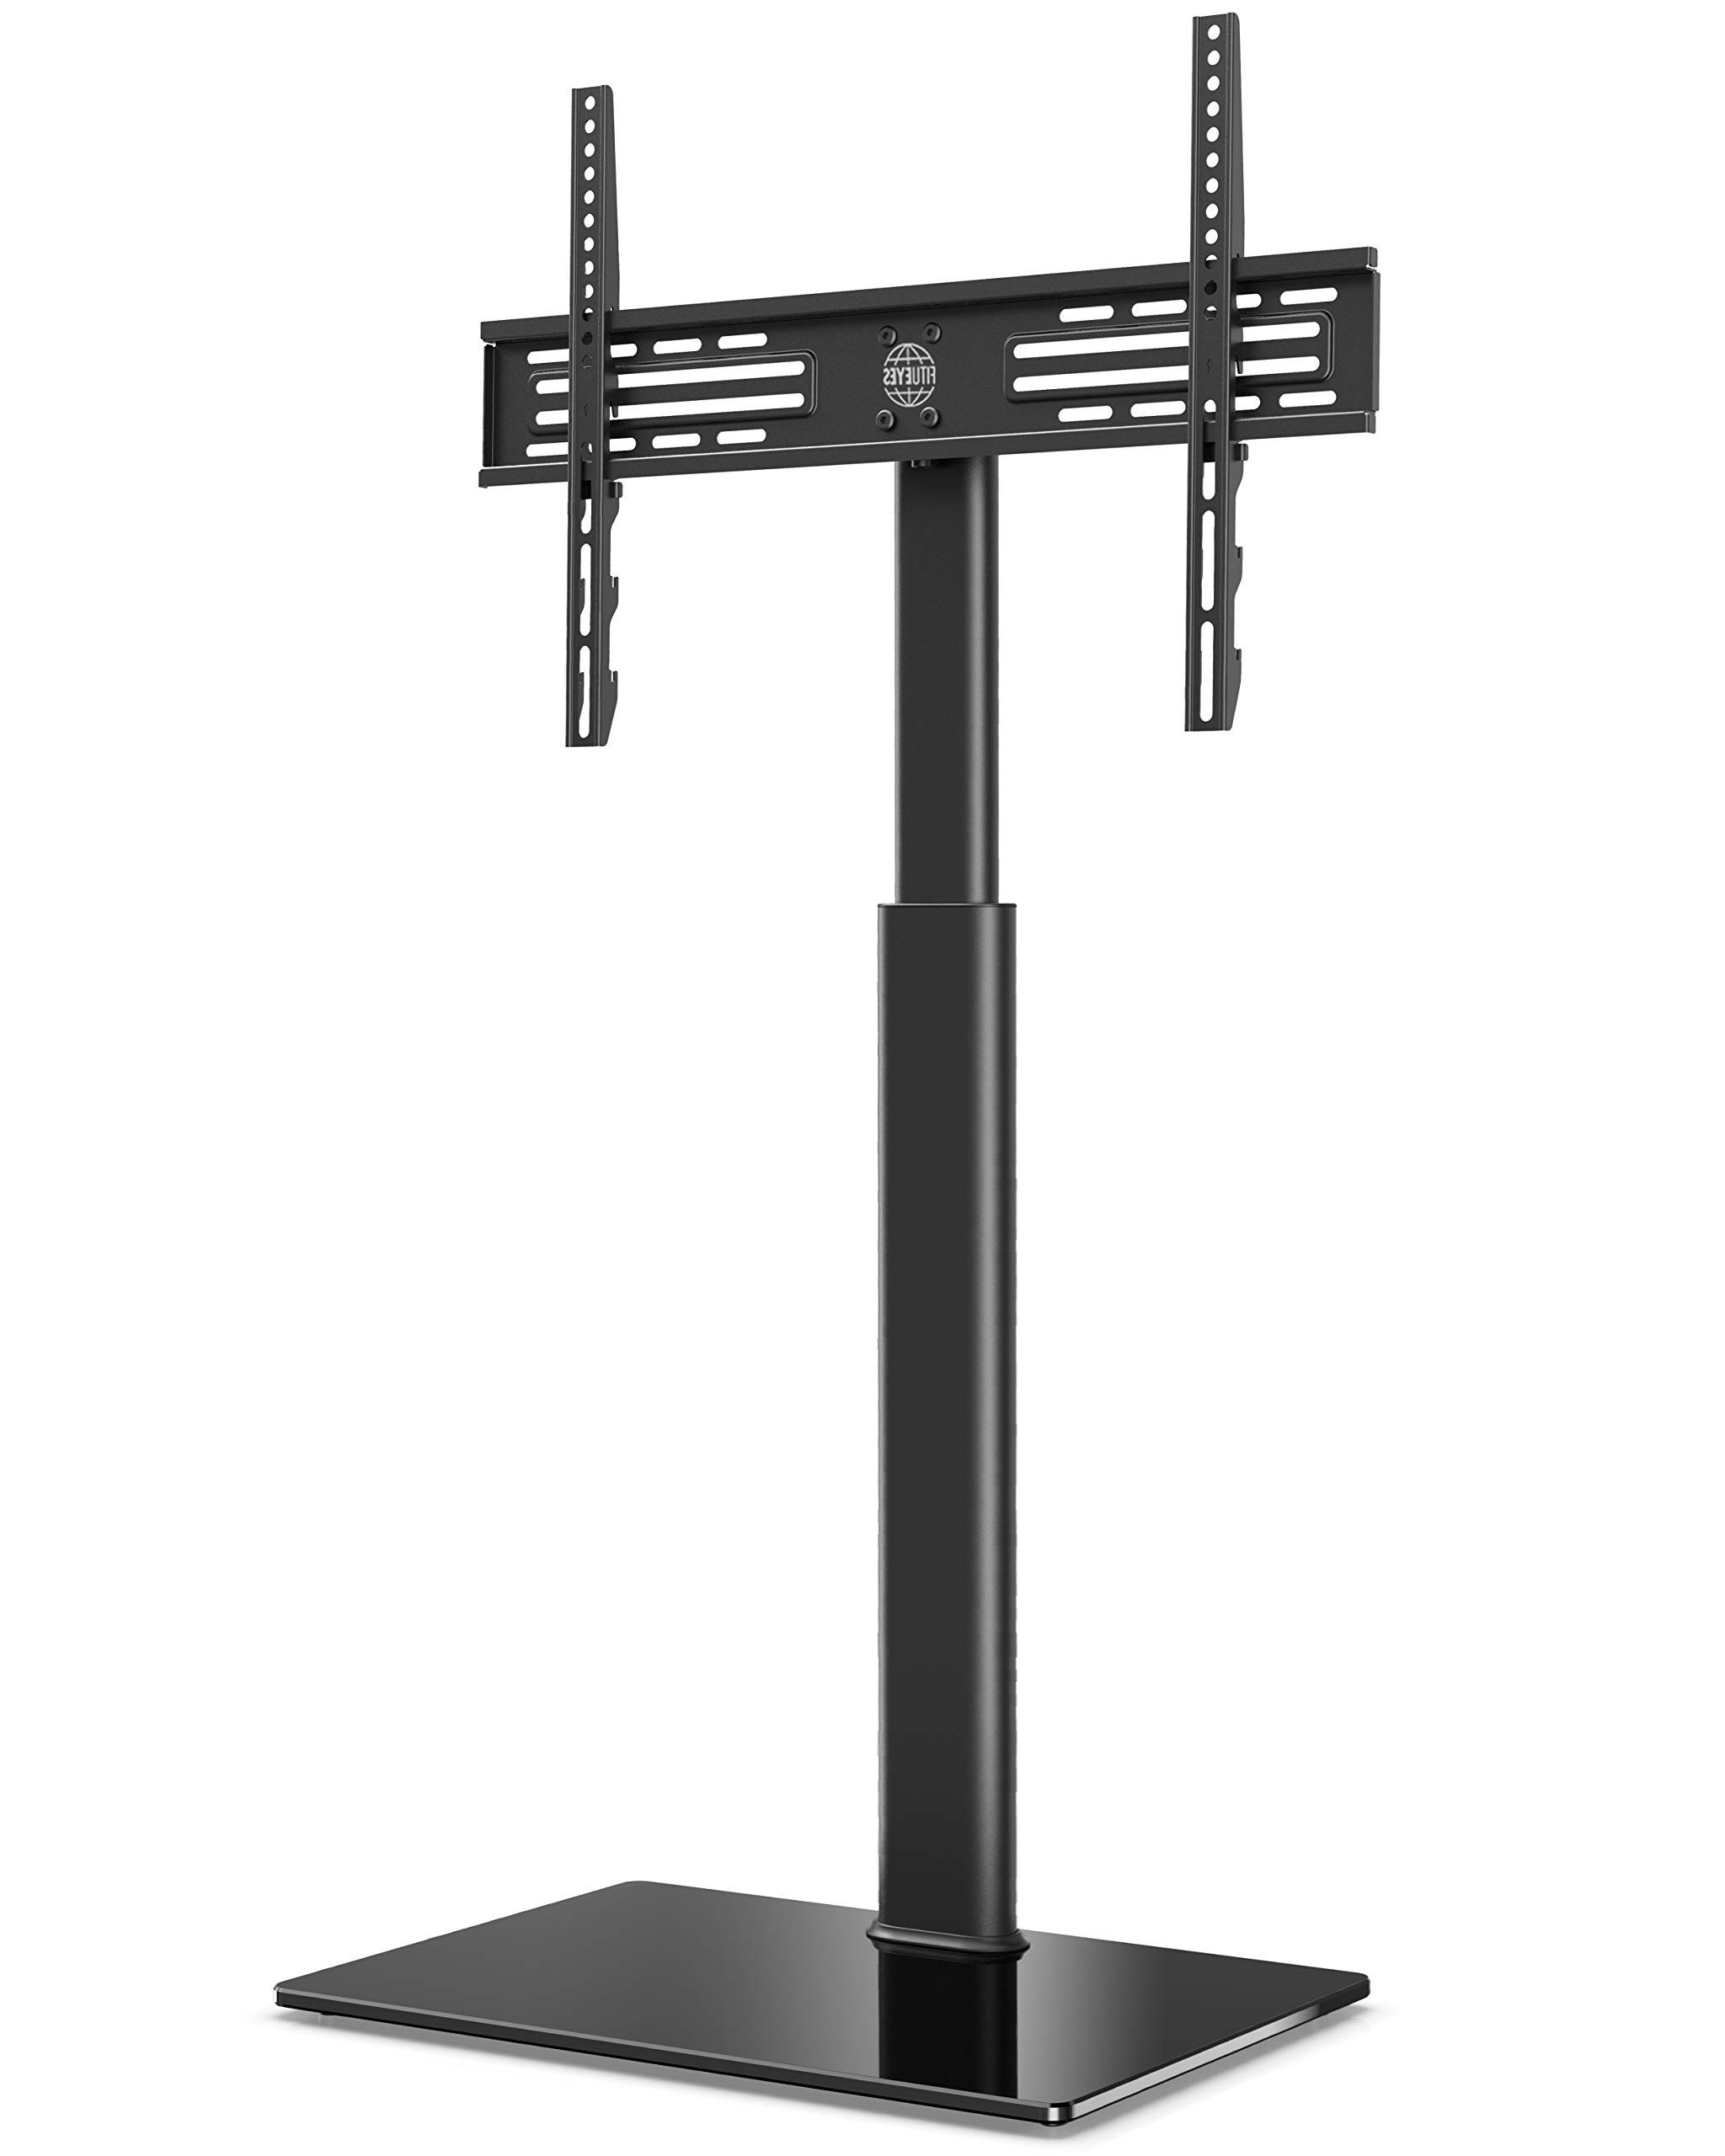 Universal Floor Tv Stands Pertaining To Recent Fitueyes Tv Stand For 32 To 60 Inch Universal Swivel Tv Floor Stand (View 14 of 15)